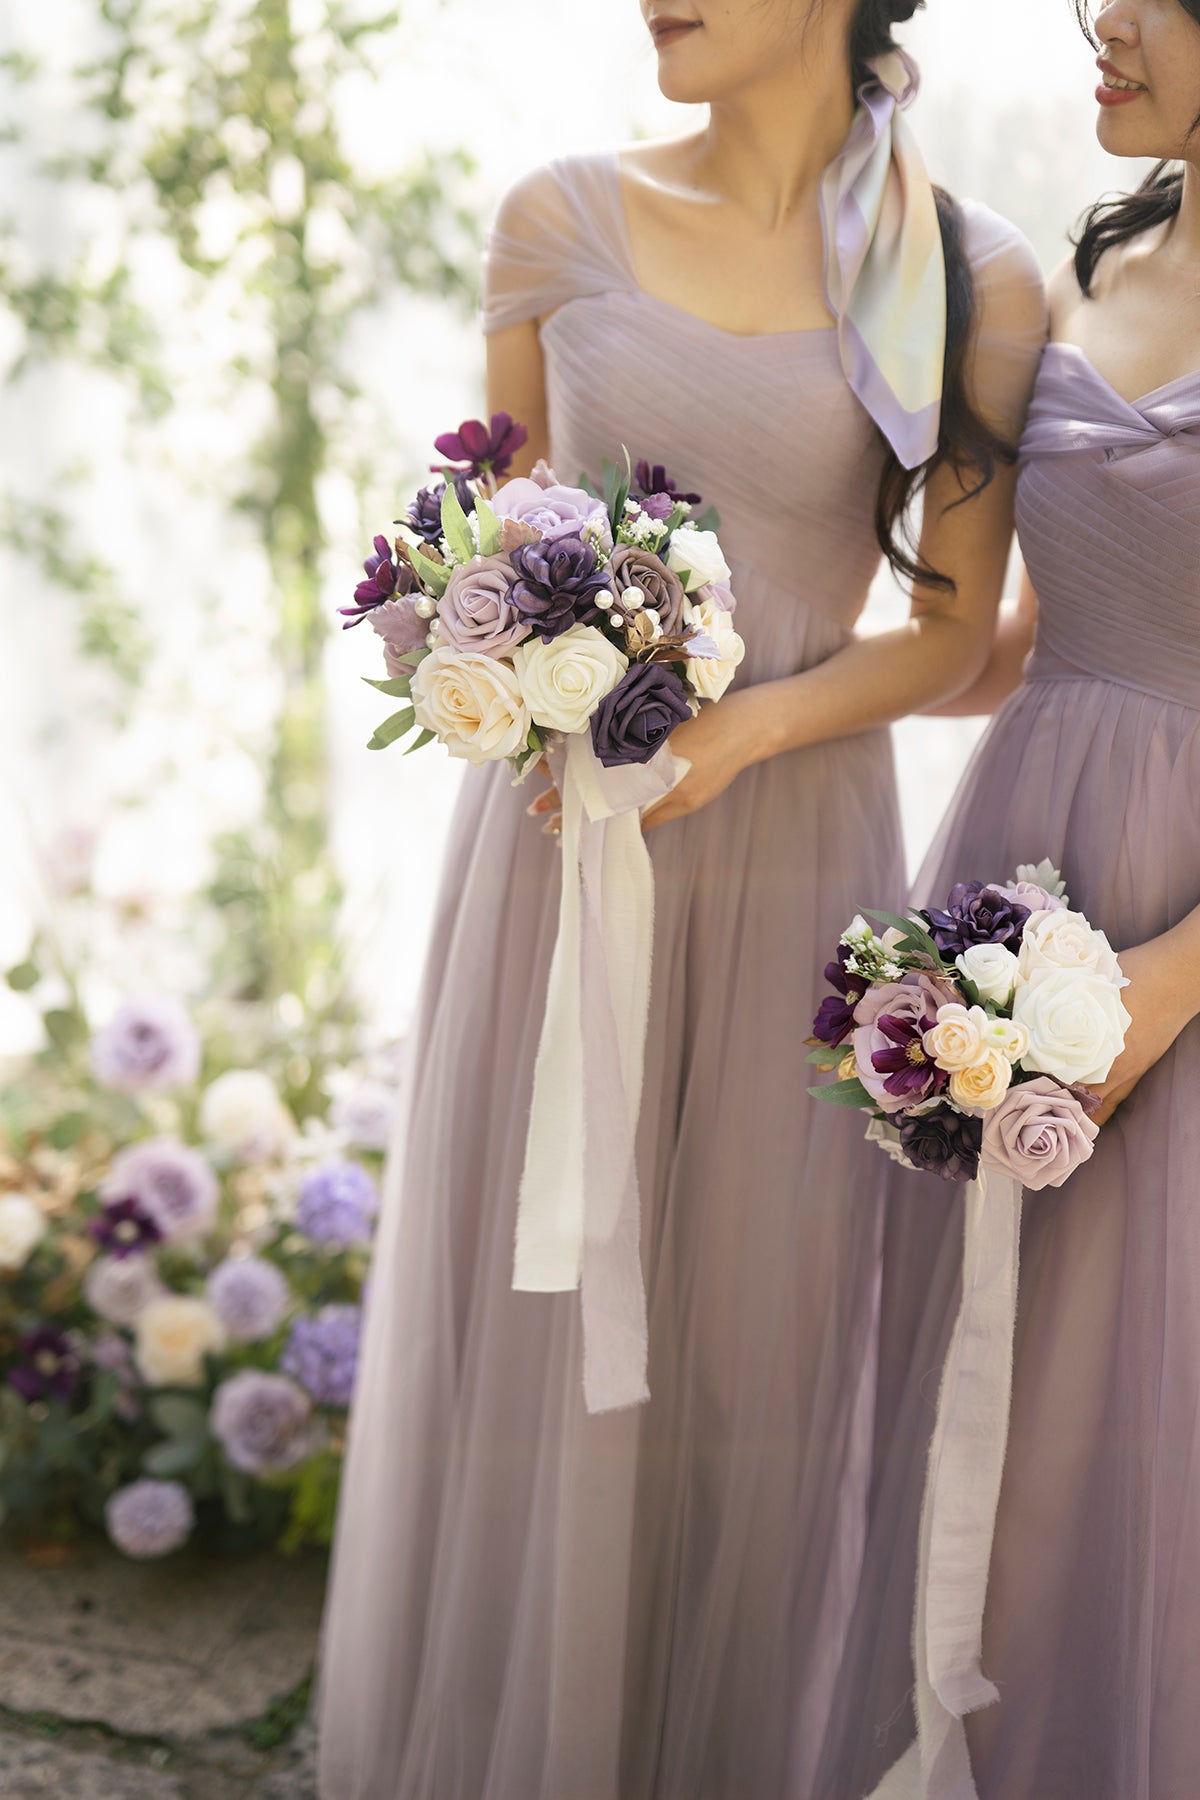 Maid of Honor & Bridesmaid Bouquets in Lilac & Gold